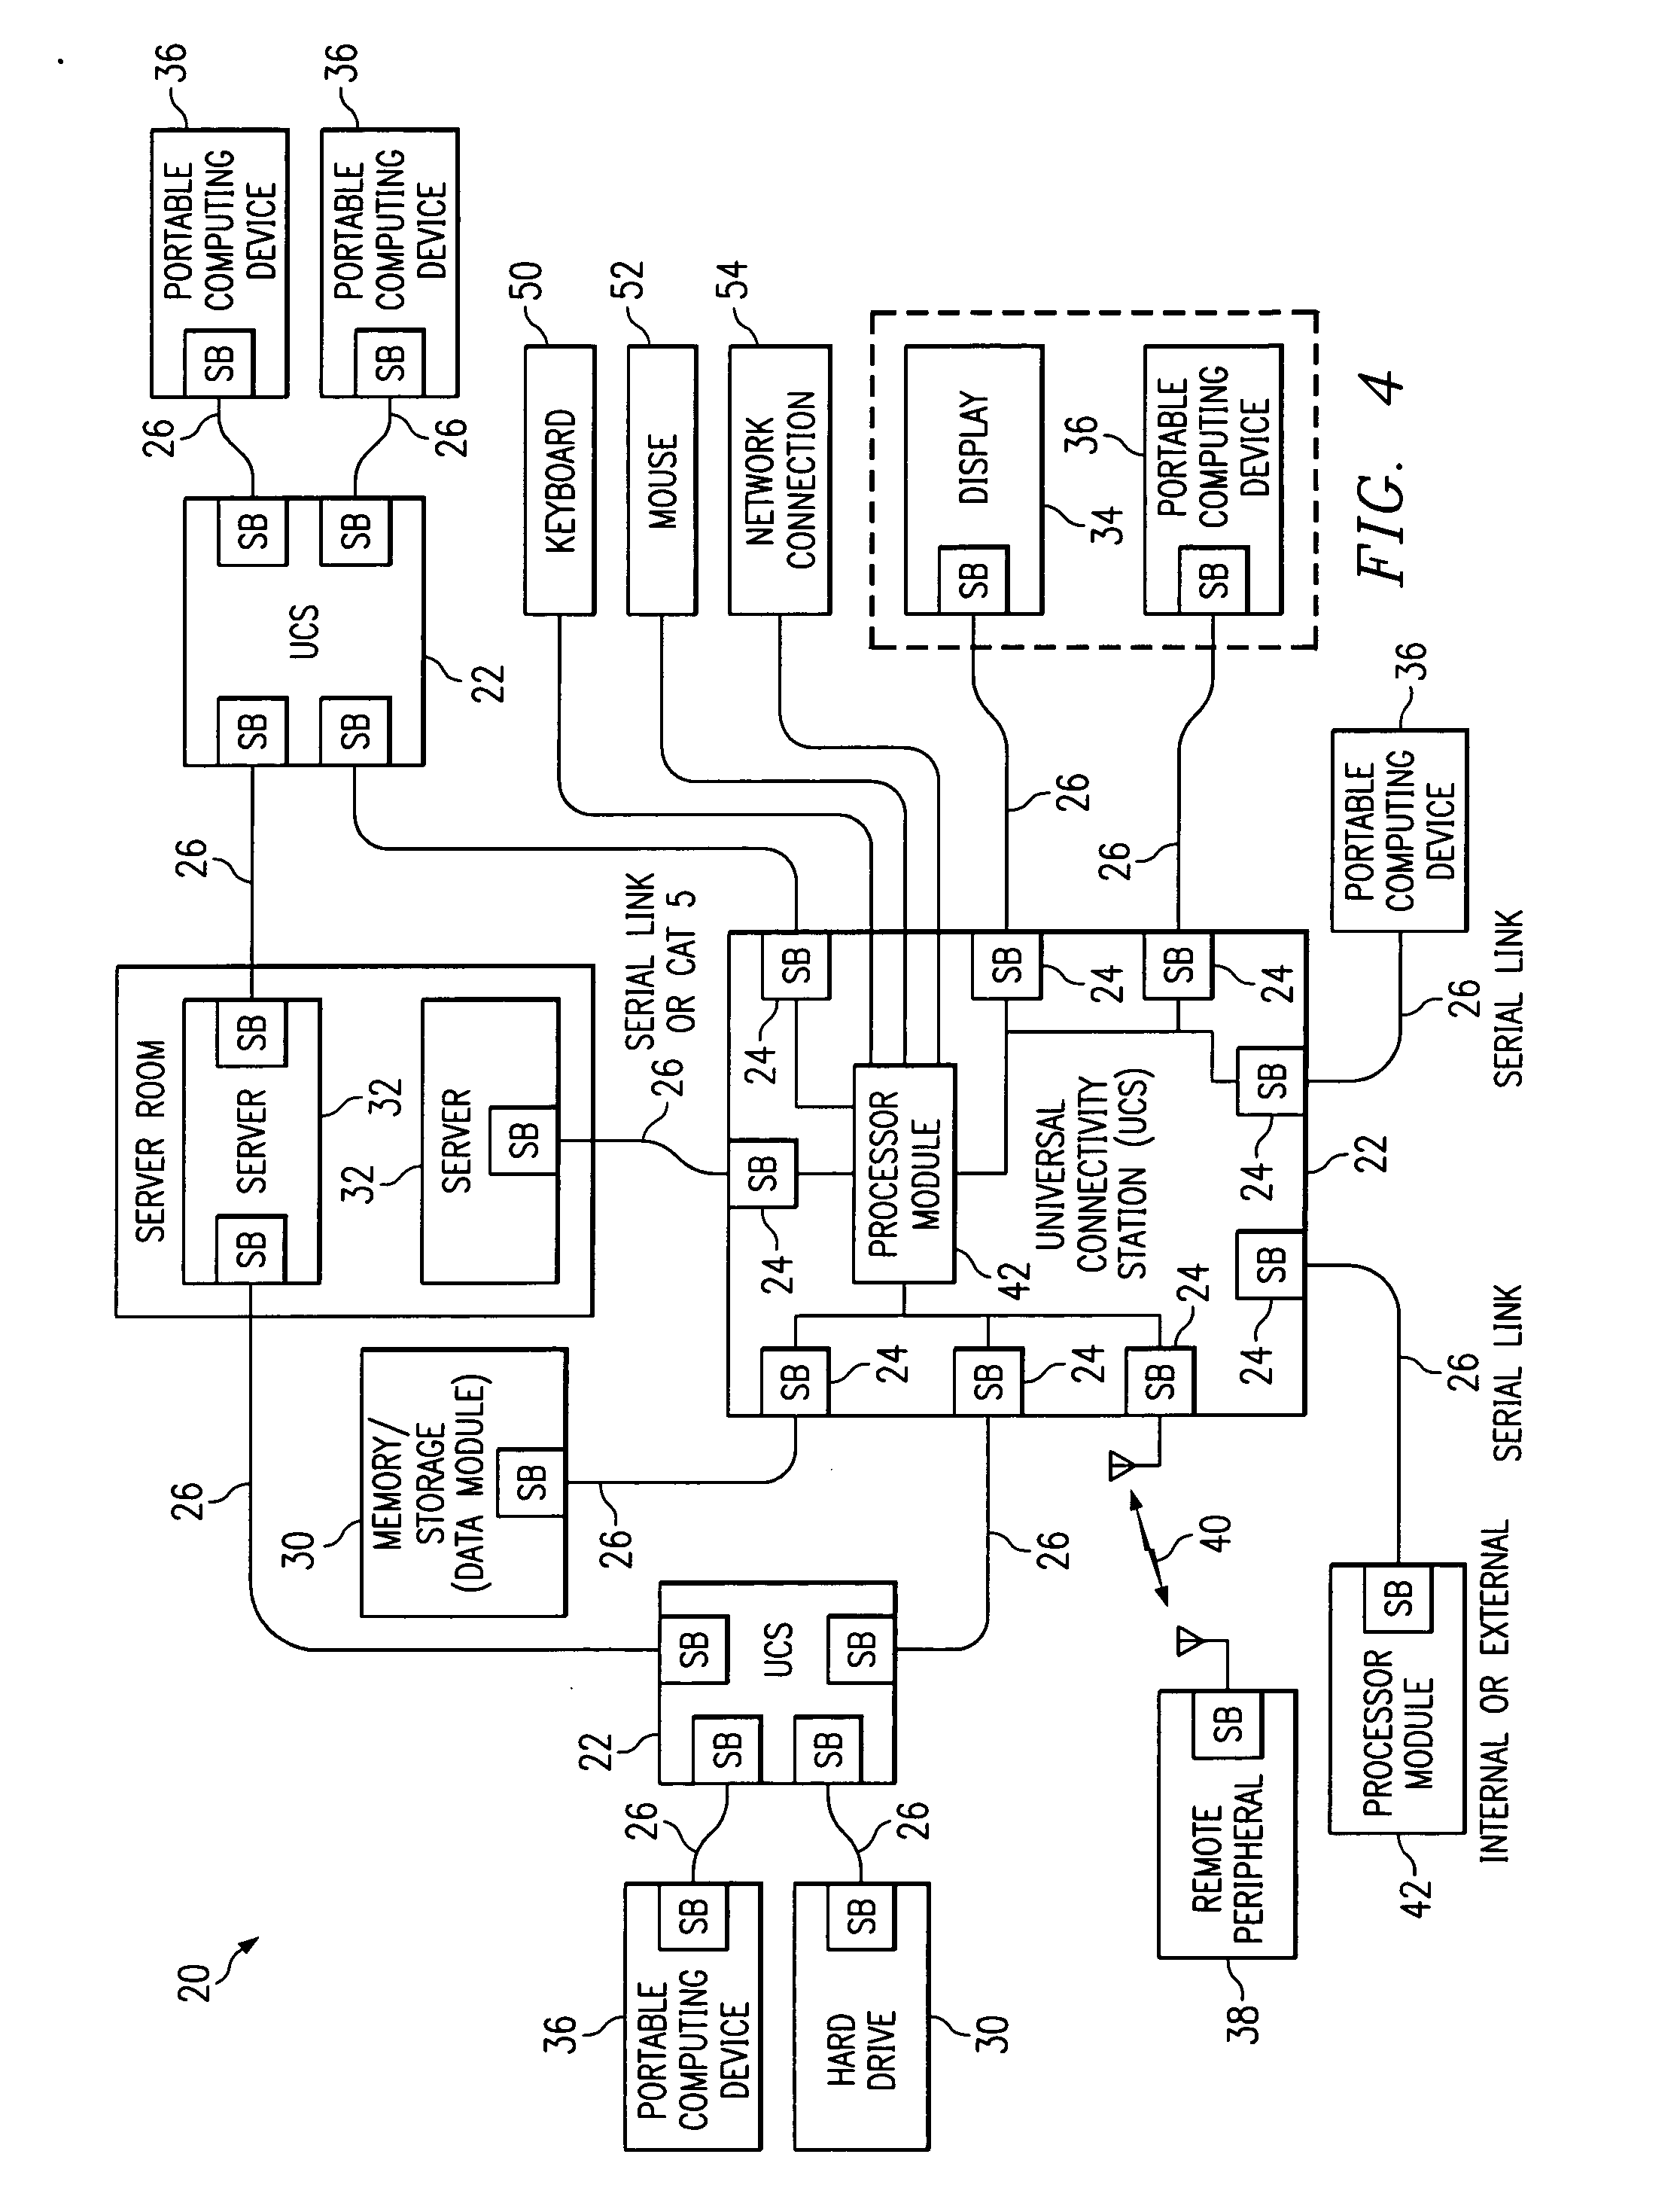 Modular presentation device with network connection for use with PDA's and Smartphones